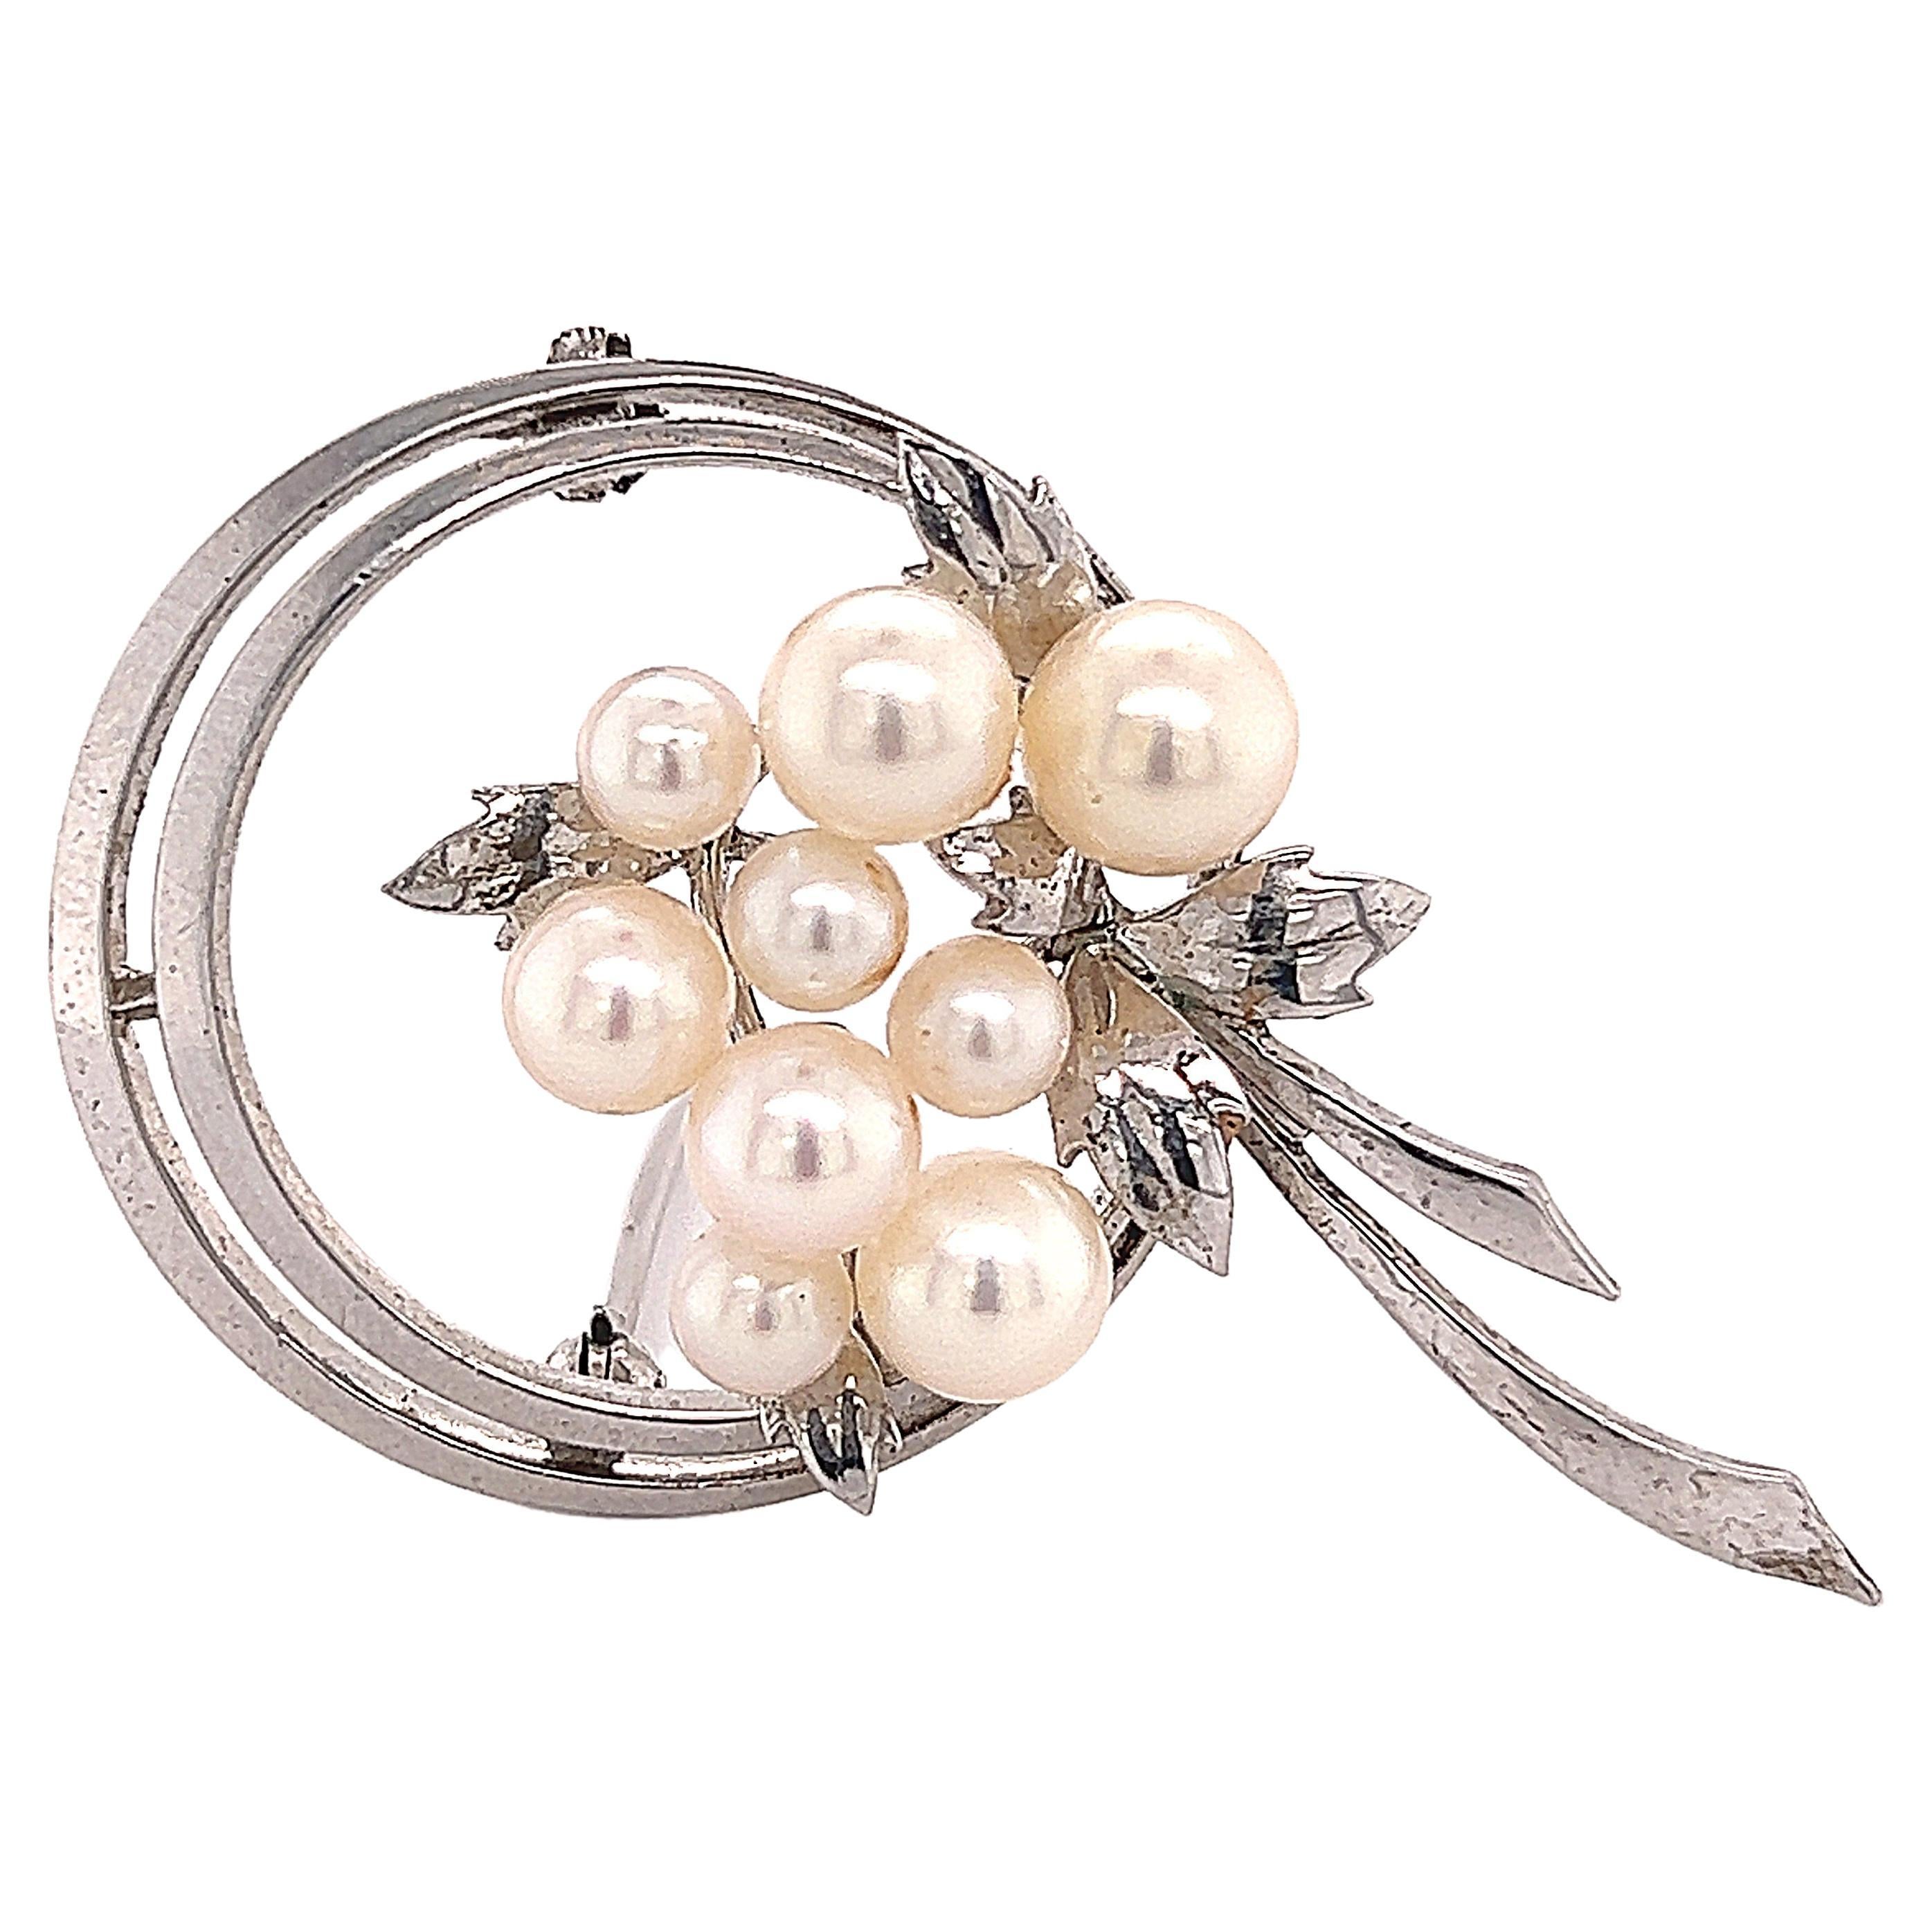 Mikimoto Estate Akoya Pearl Brooch Sterling Silver 6.25 mm 6.8g For Sale